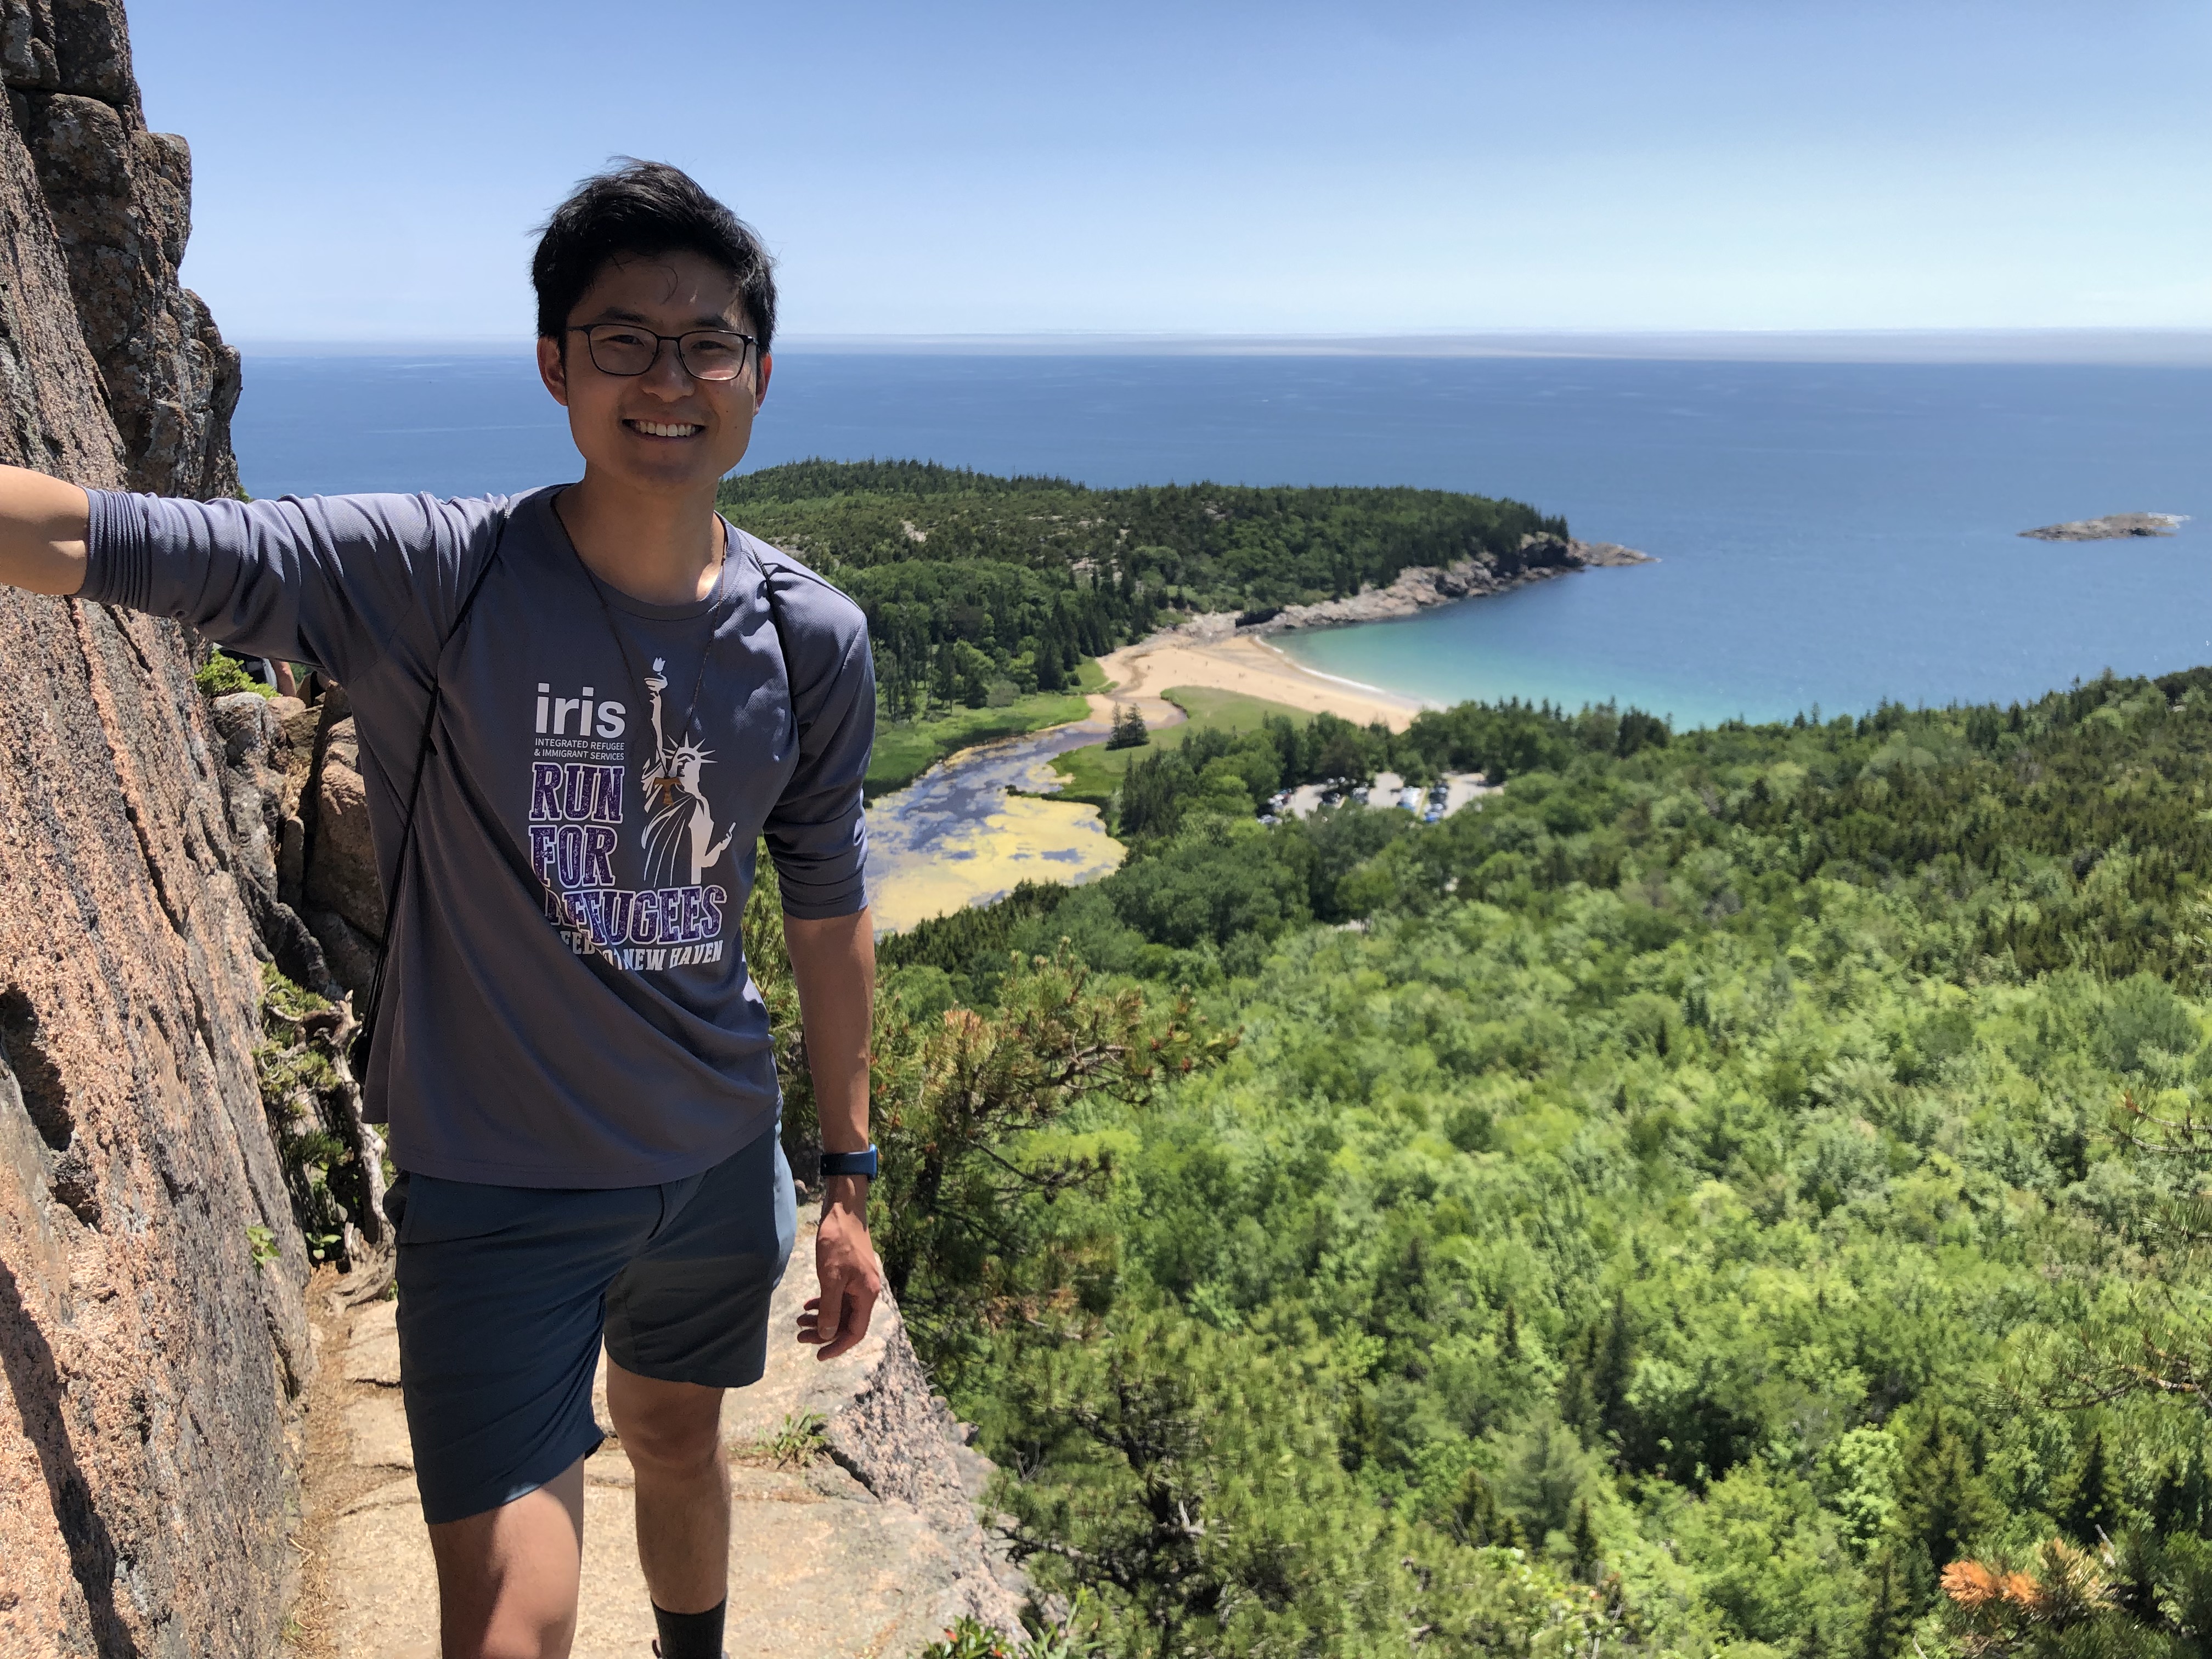 Kevin standing on the edge of a cliff overlooking the ocean and forest. 